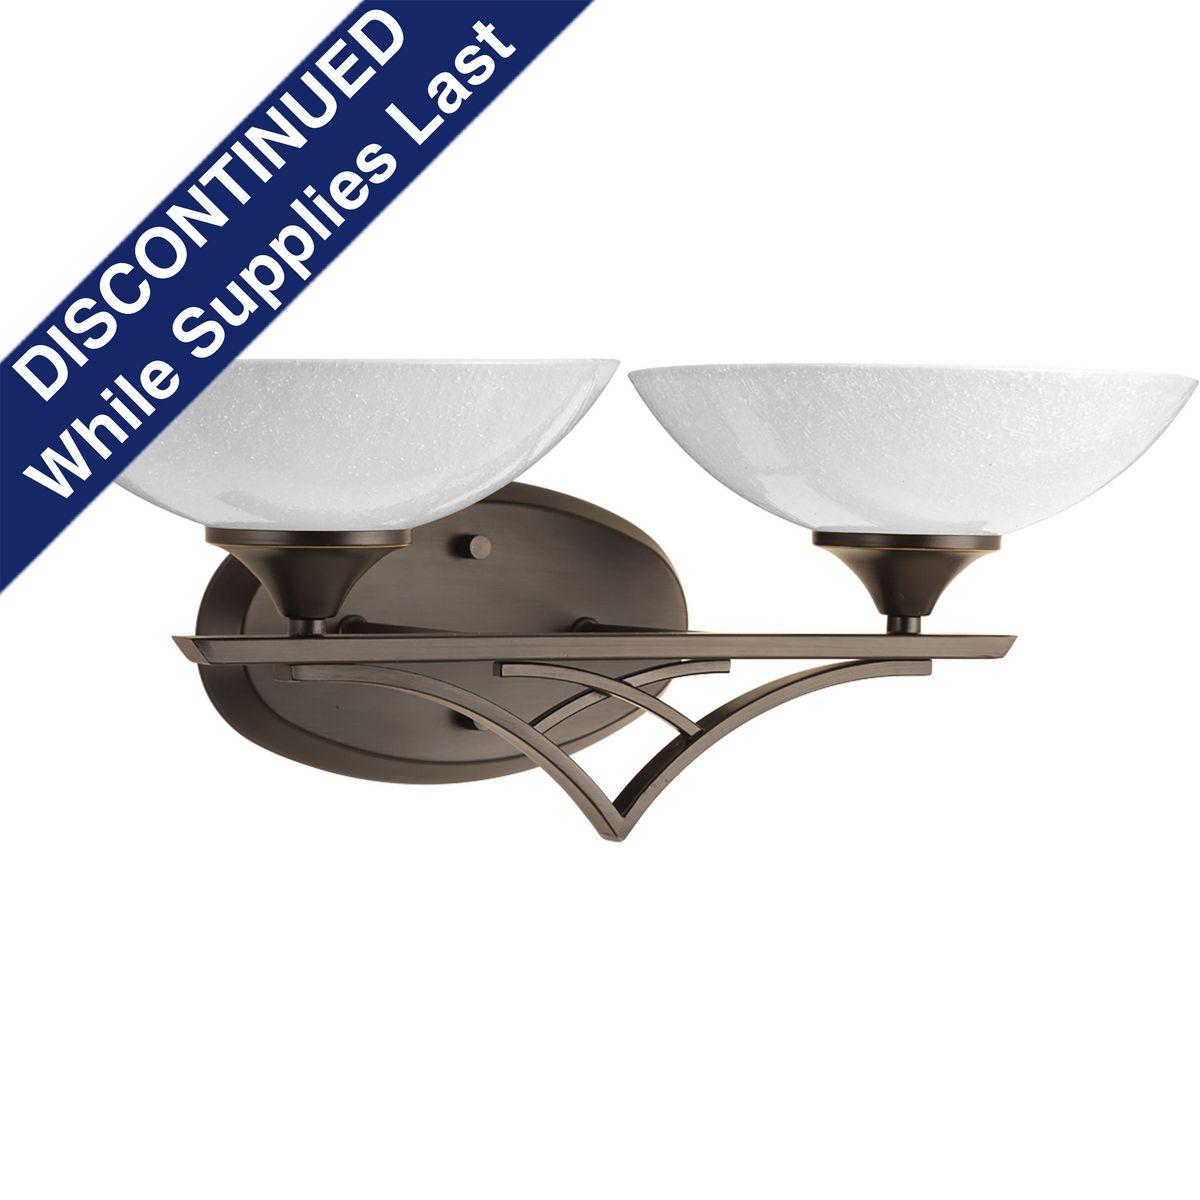 Hubbell P2151-20 Inspire guests to your home with a midcentury, modern design when you install this two-light bath fixture from Progress Lighting. The bronze frame conveys a sense of elegance, while the lightbulbs flicker inside the seeded glass shades. Two-light bath wit